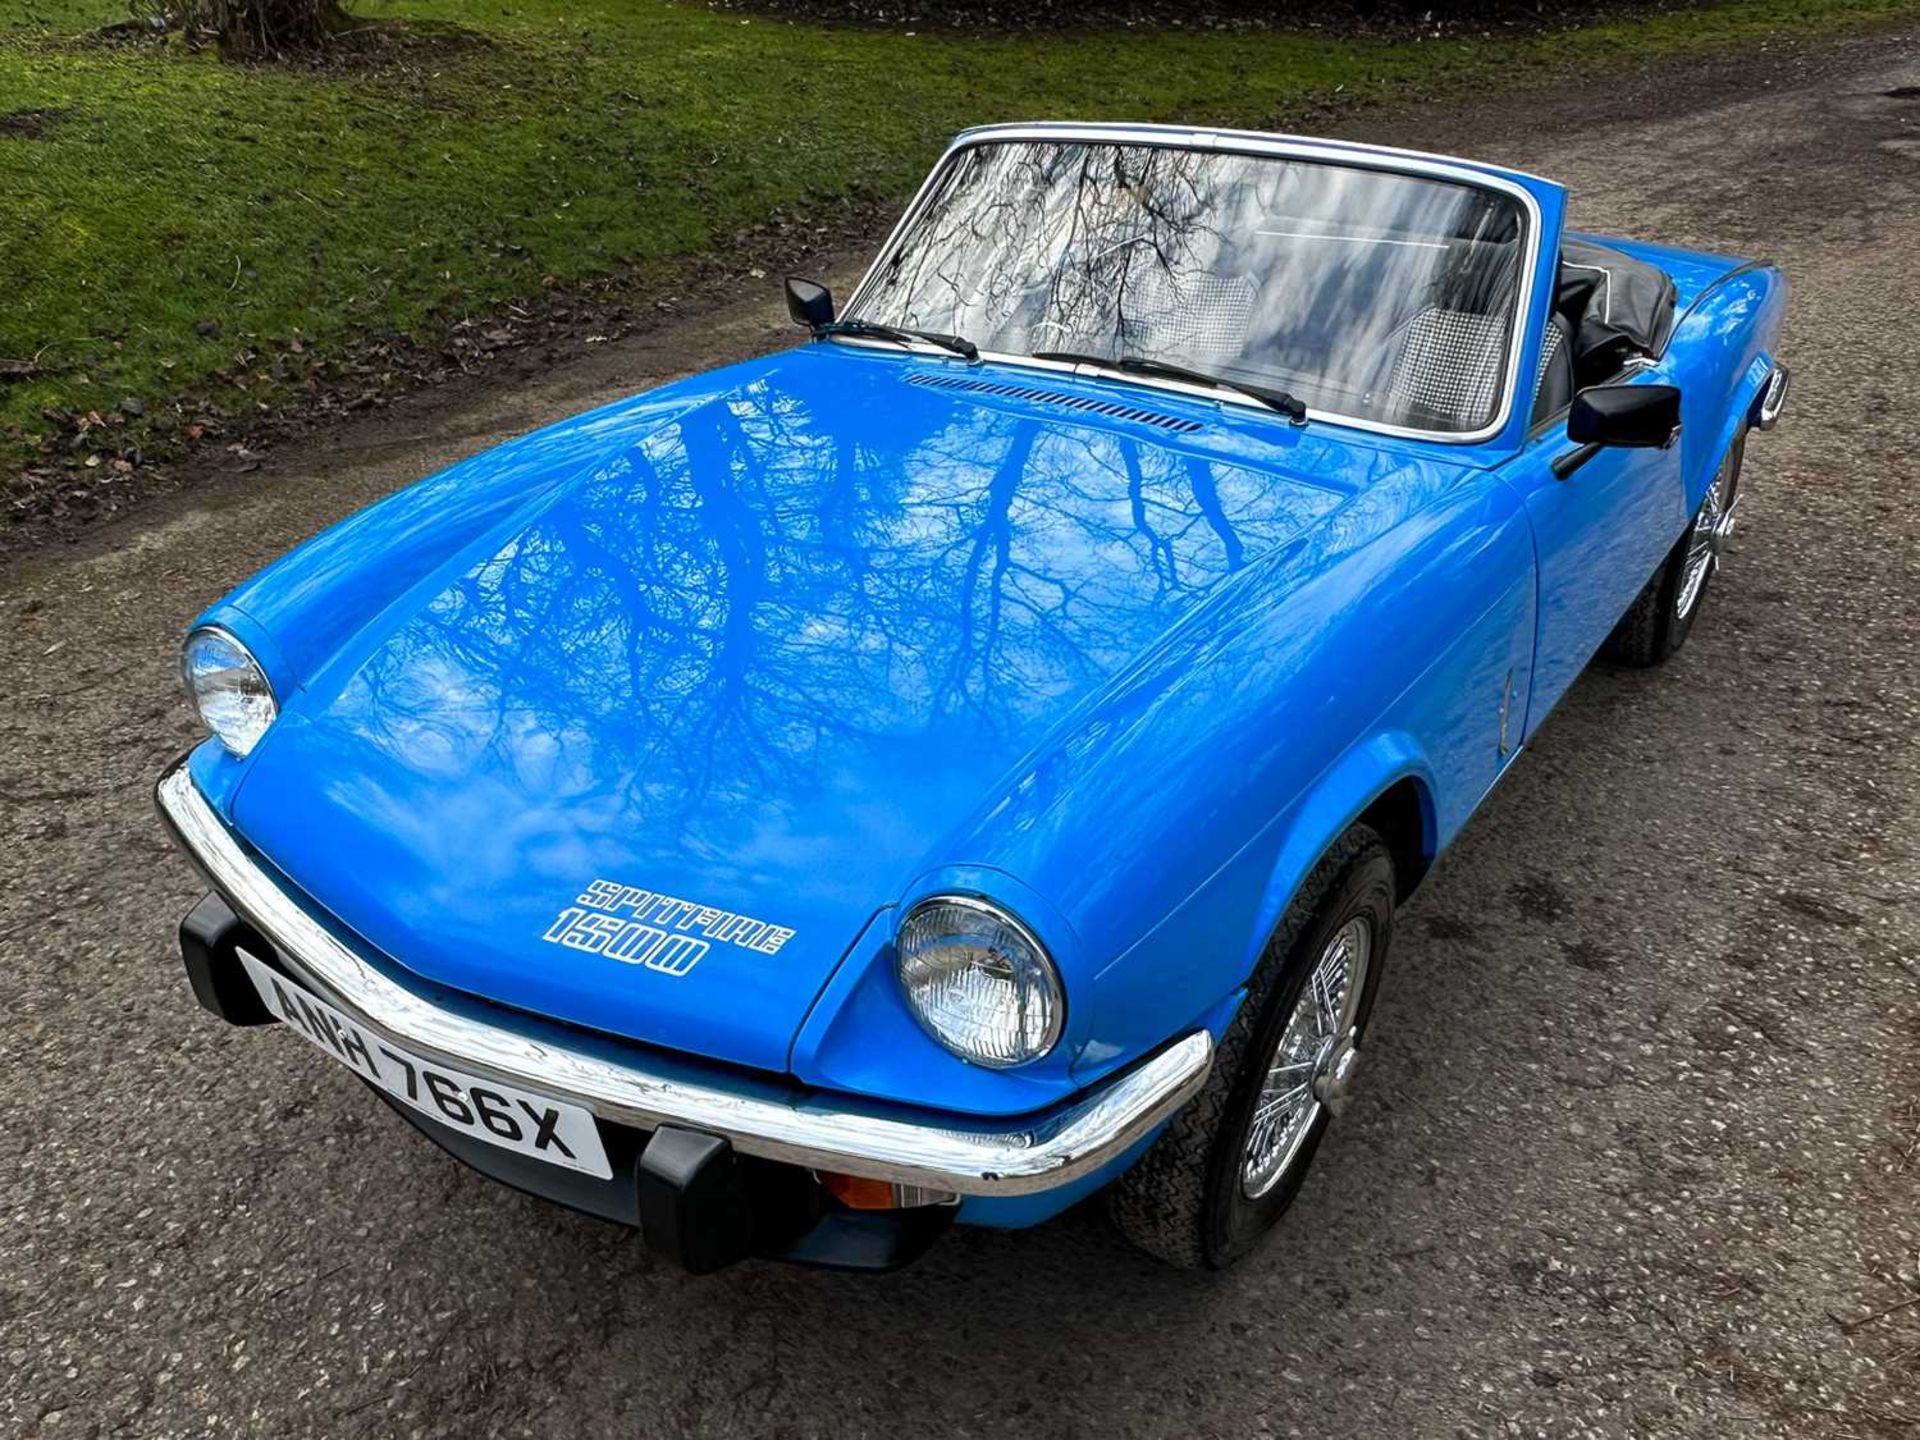 1981 Triumph Spitfire 1500 Comes with original bill of sale - Image 6 of 96